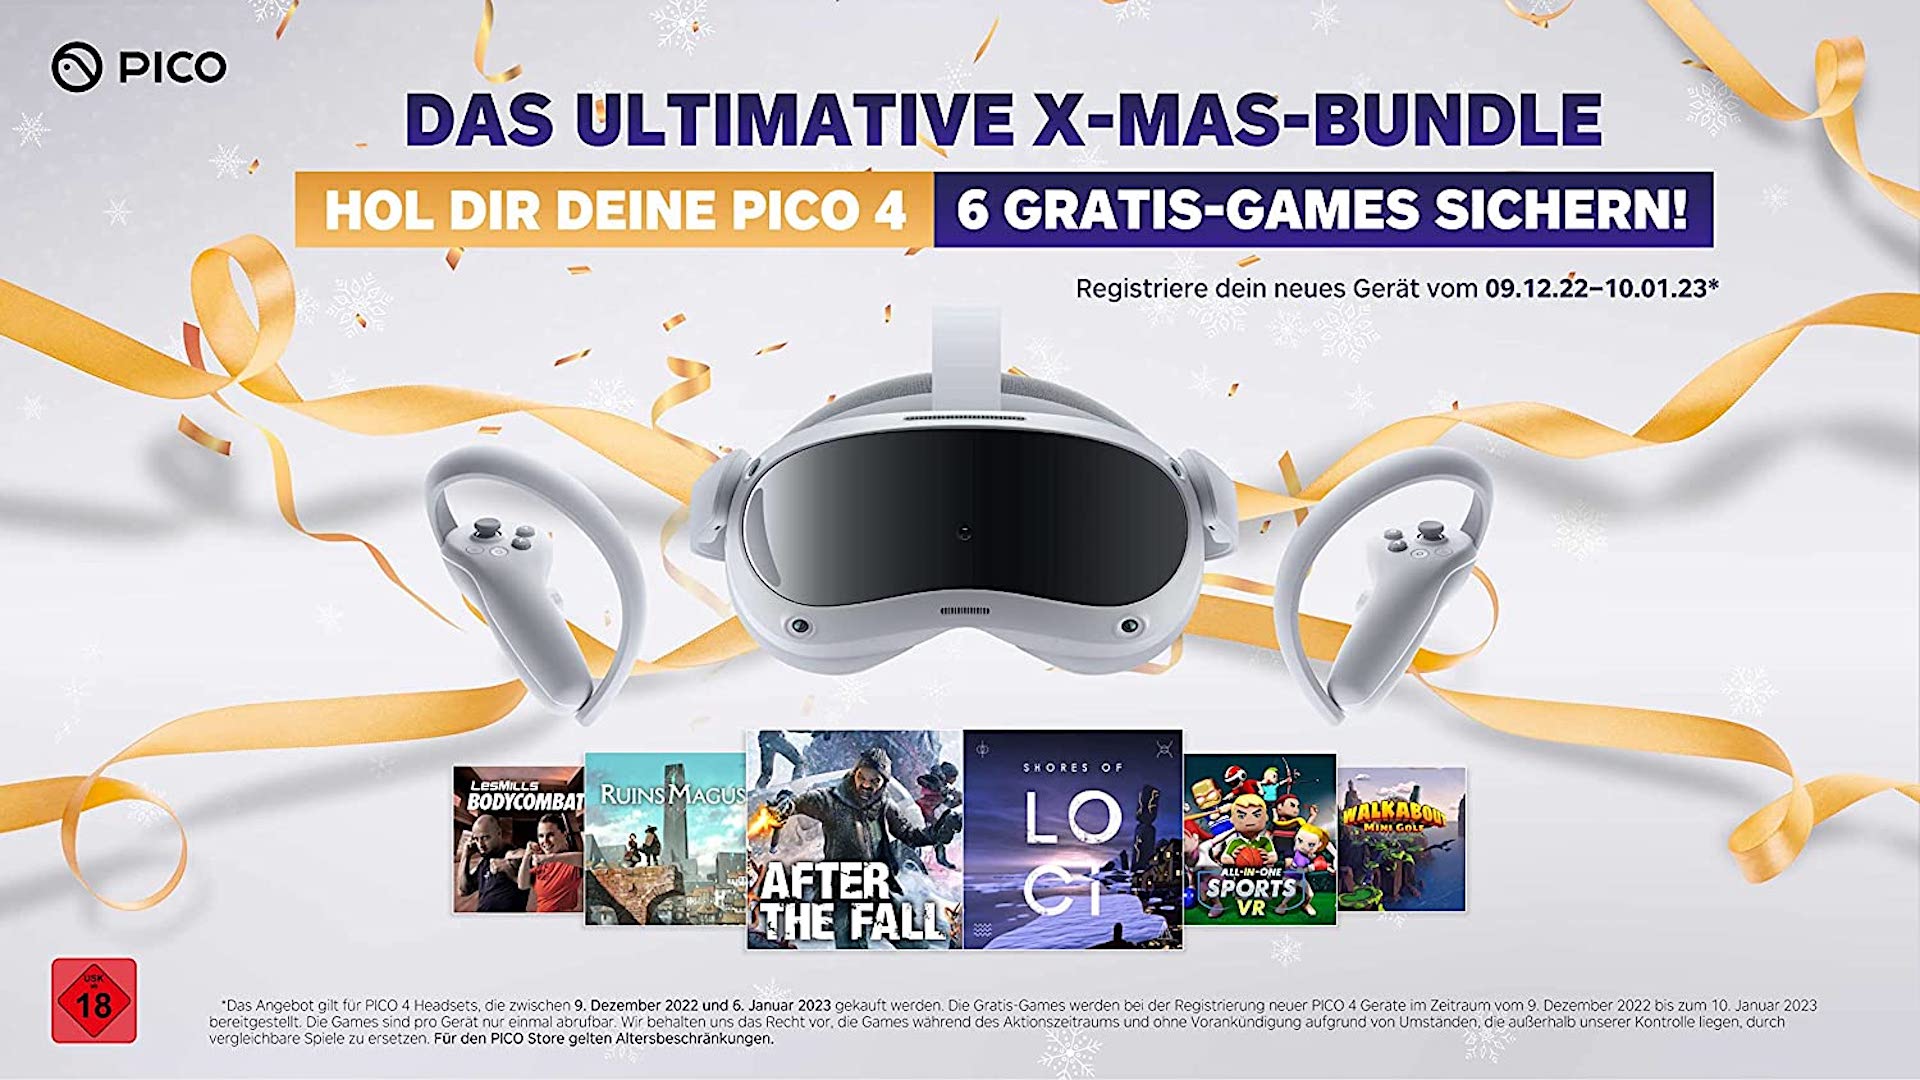 Buy Pico 4 and get six VR games for free